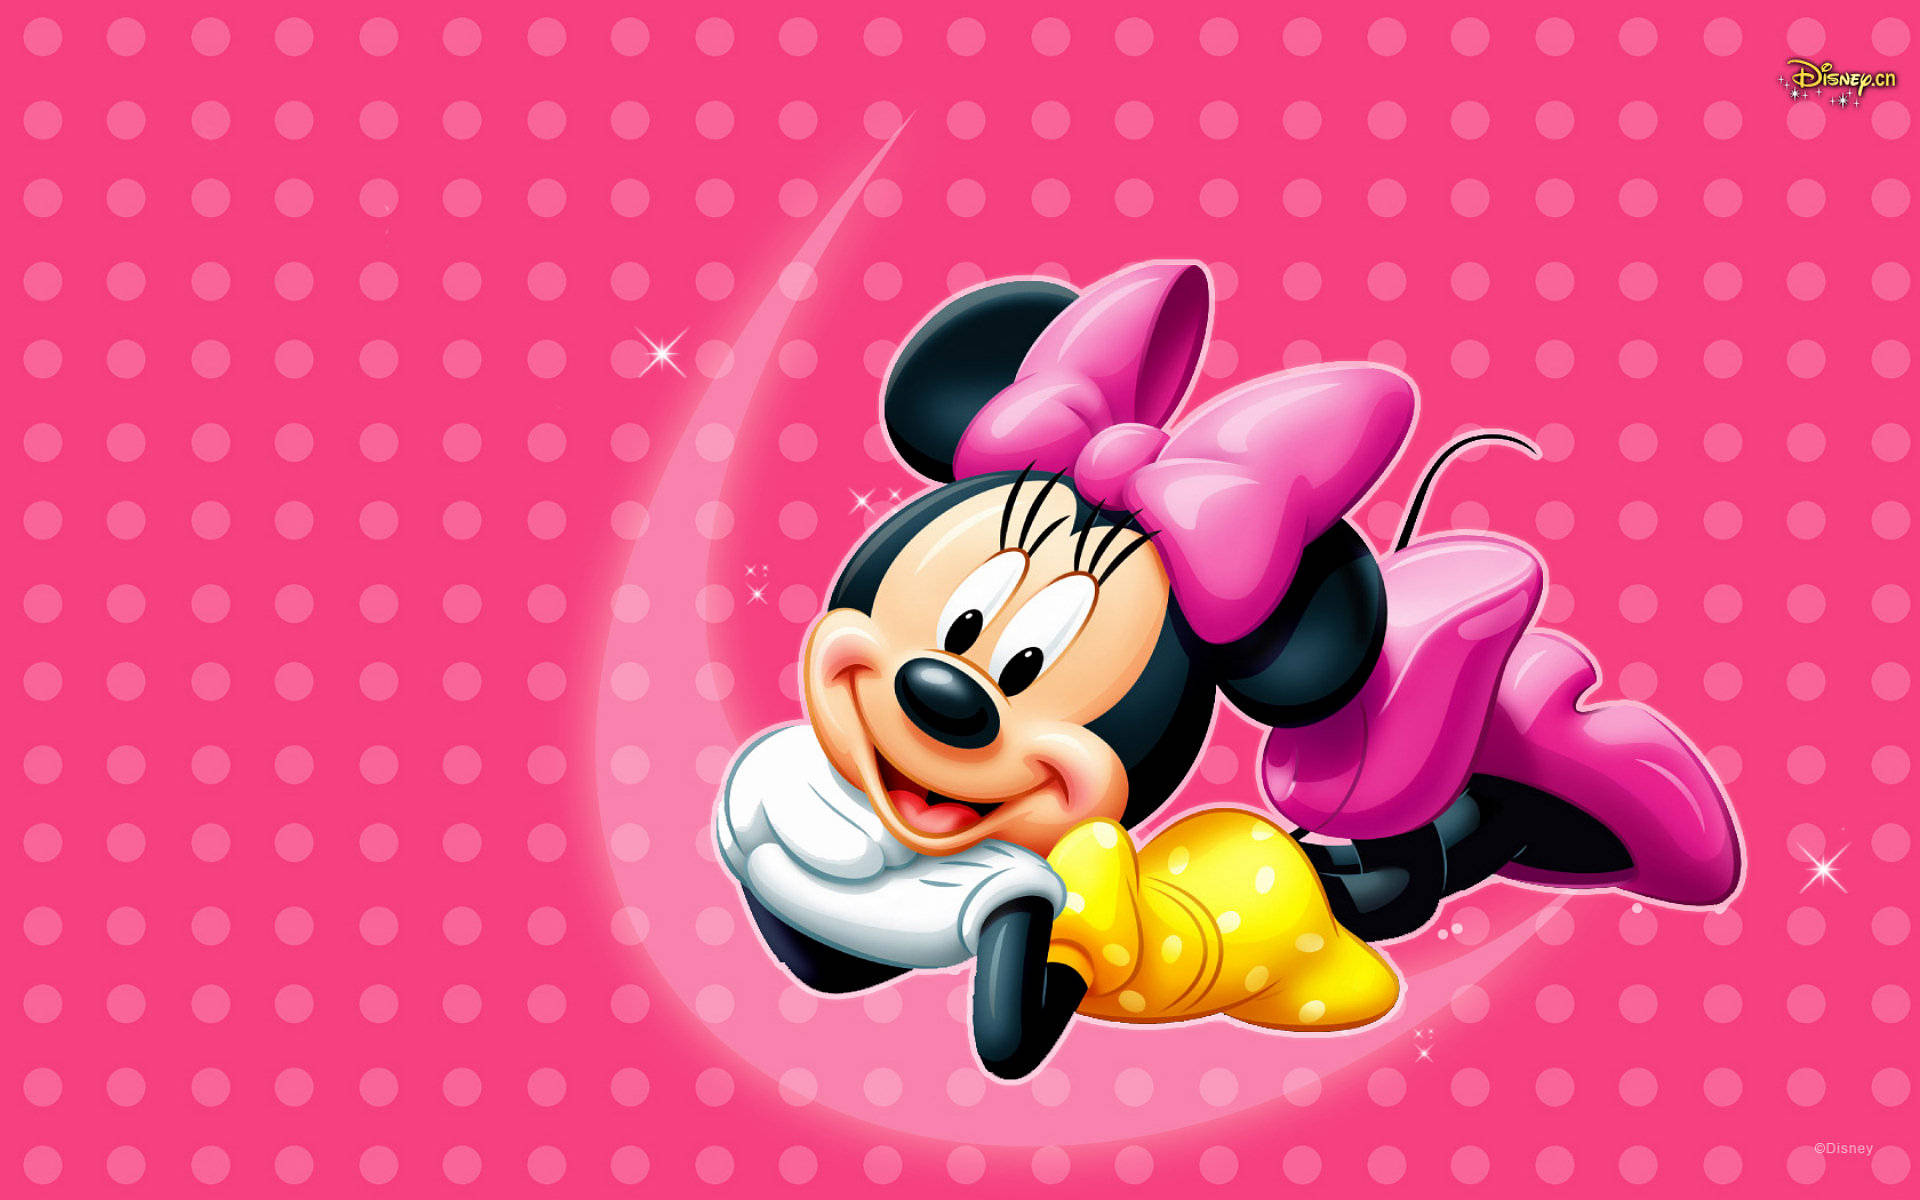 Celebrate The Joy Of Childhood With Disney's Minnie Mouse!